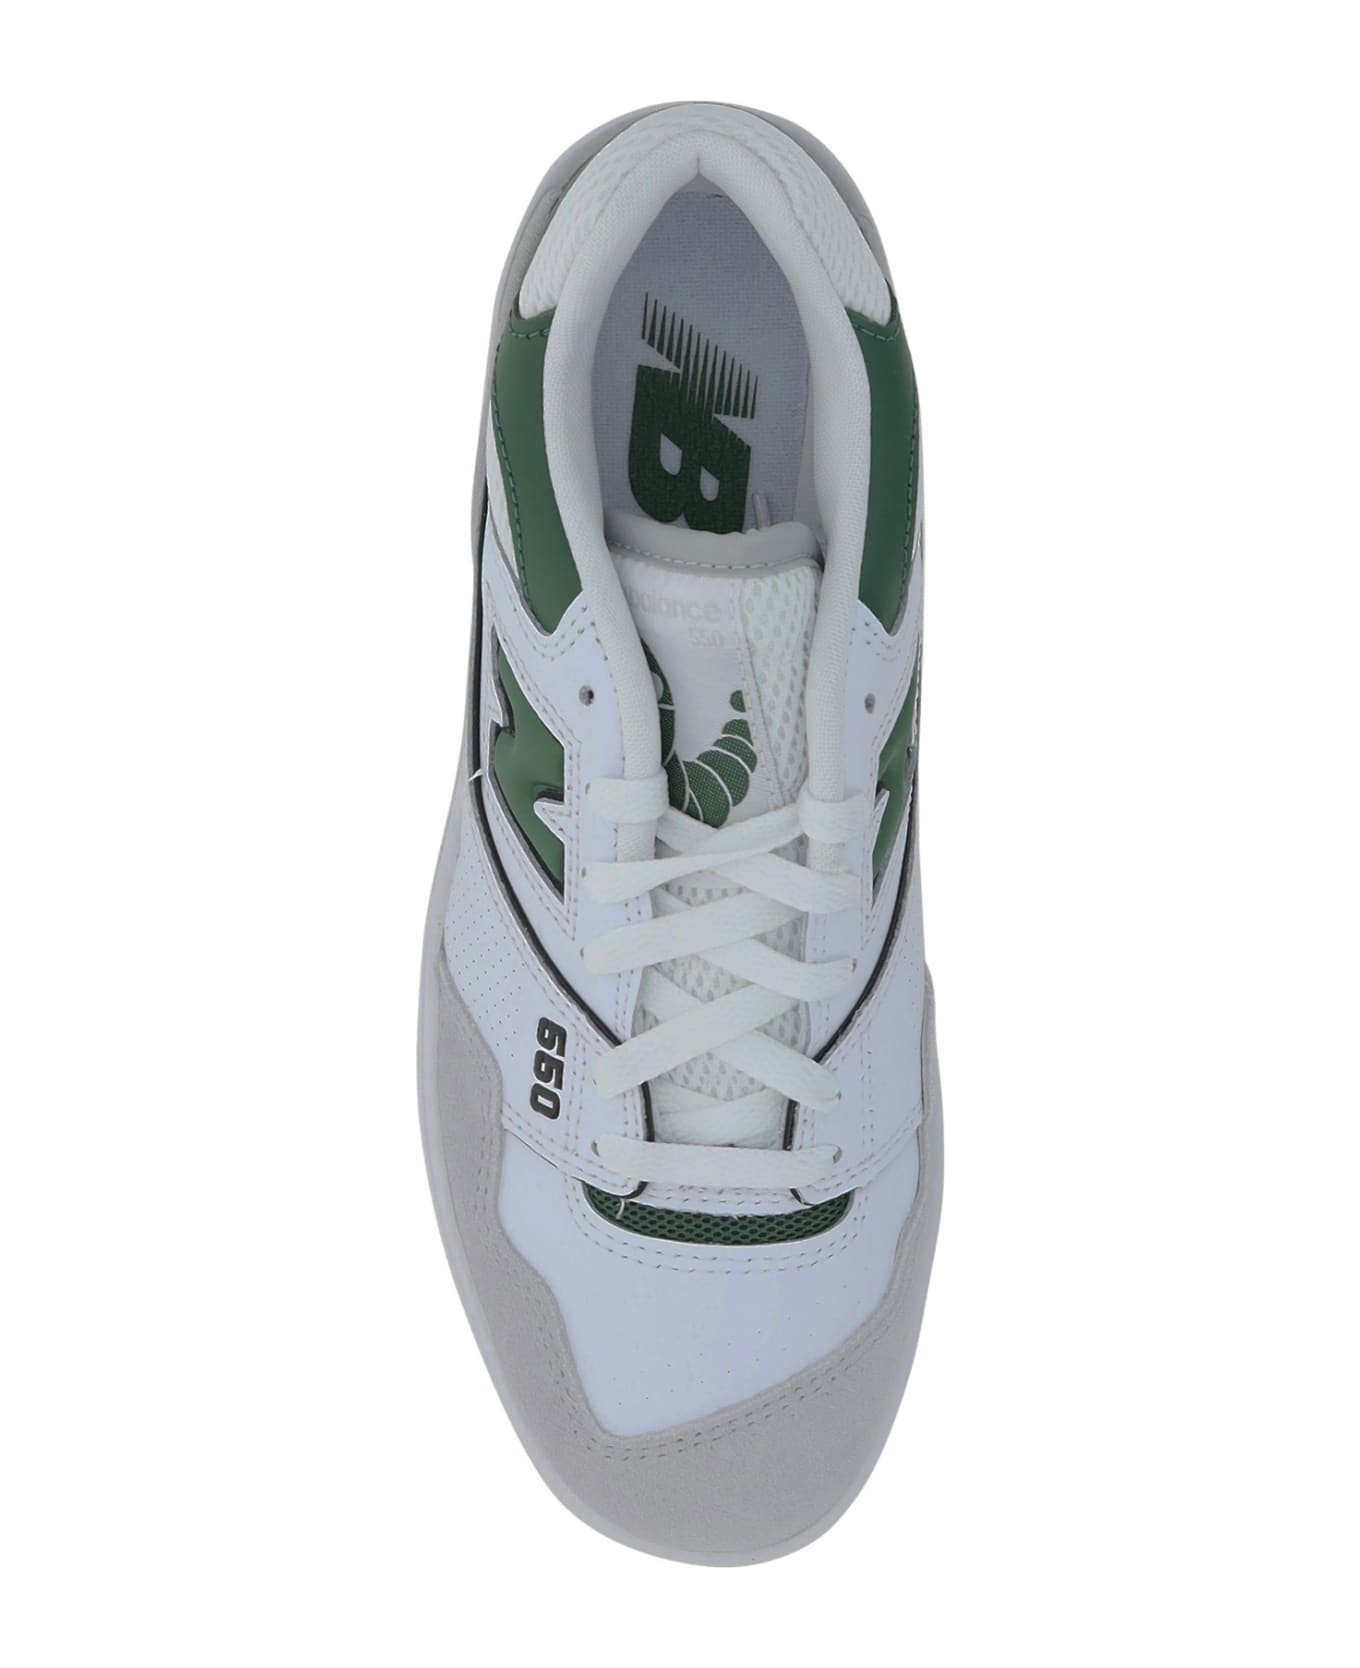 New Balance 550 Sneakers - White/green